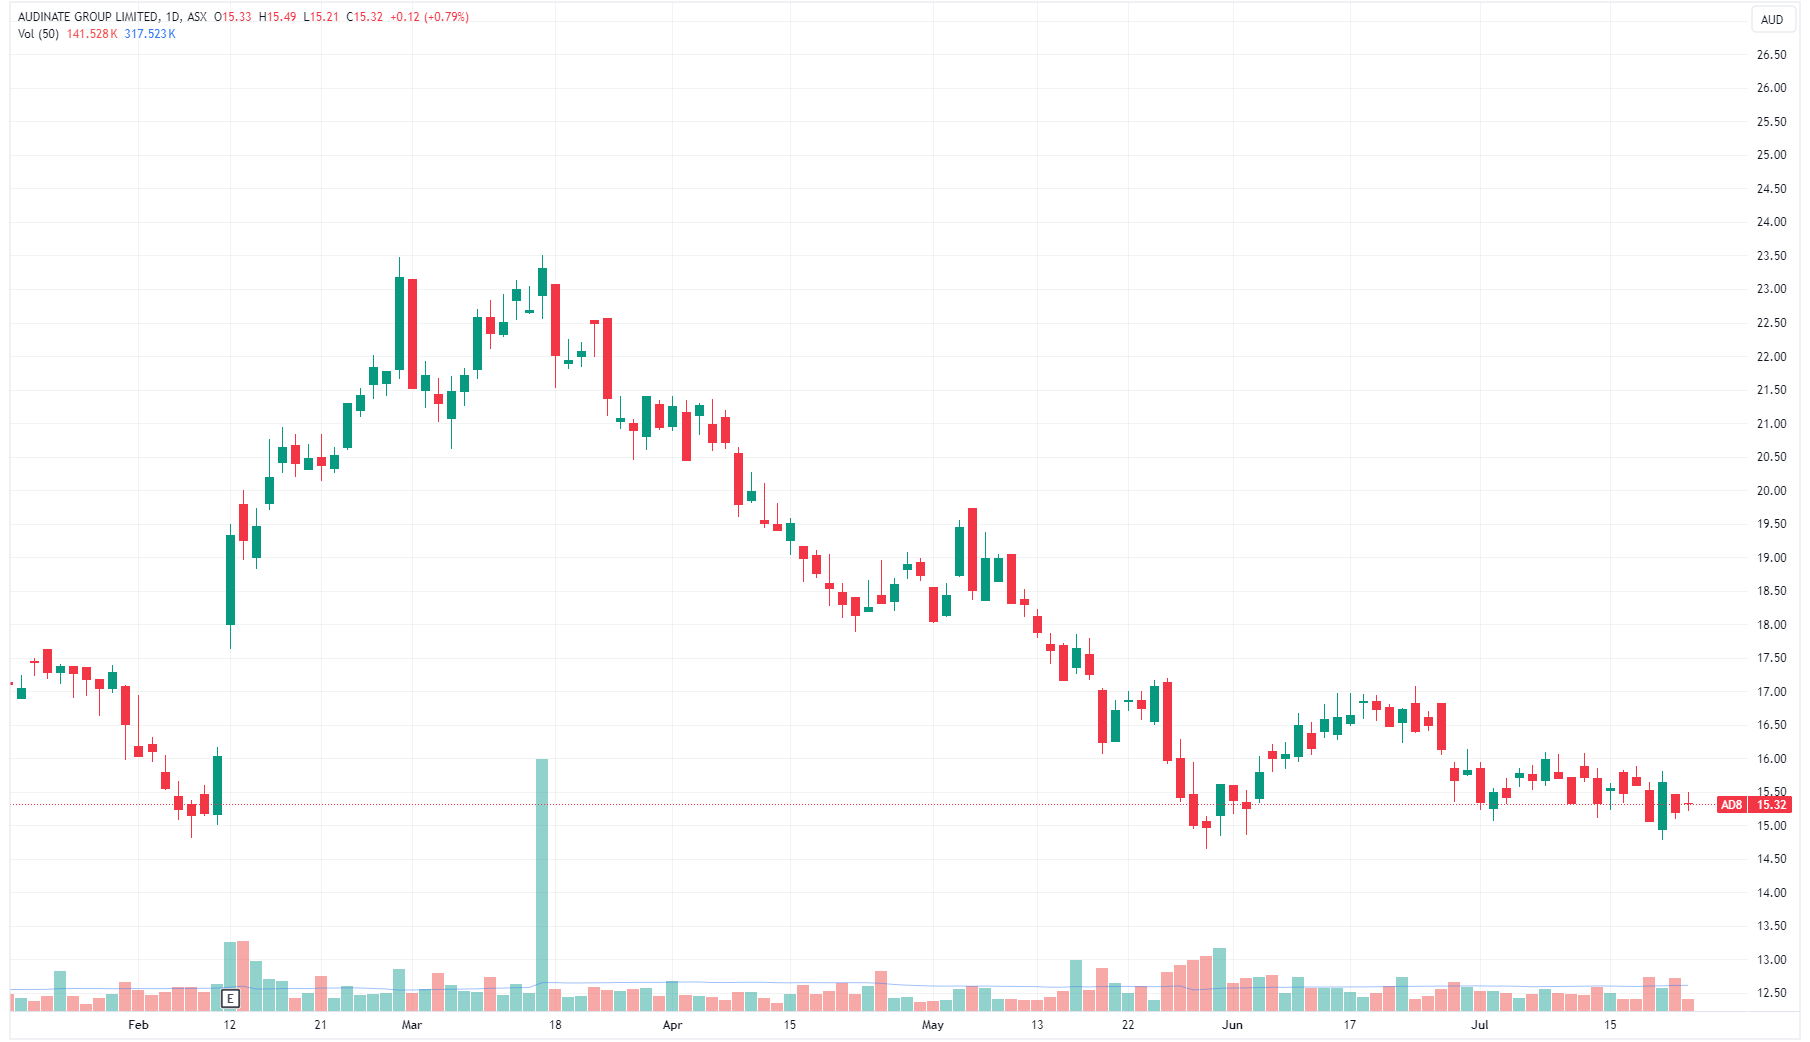 Audinate rallied 20.5% on the day of results and another 20% over the next 14 sessions (Source: TradingView)